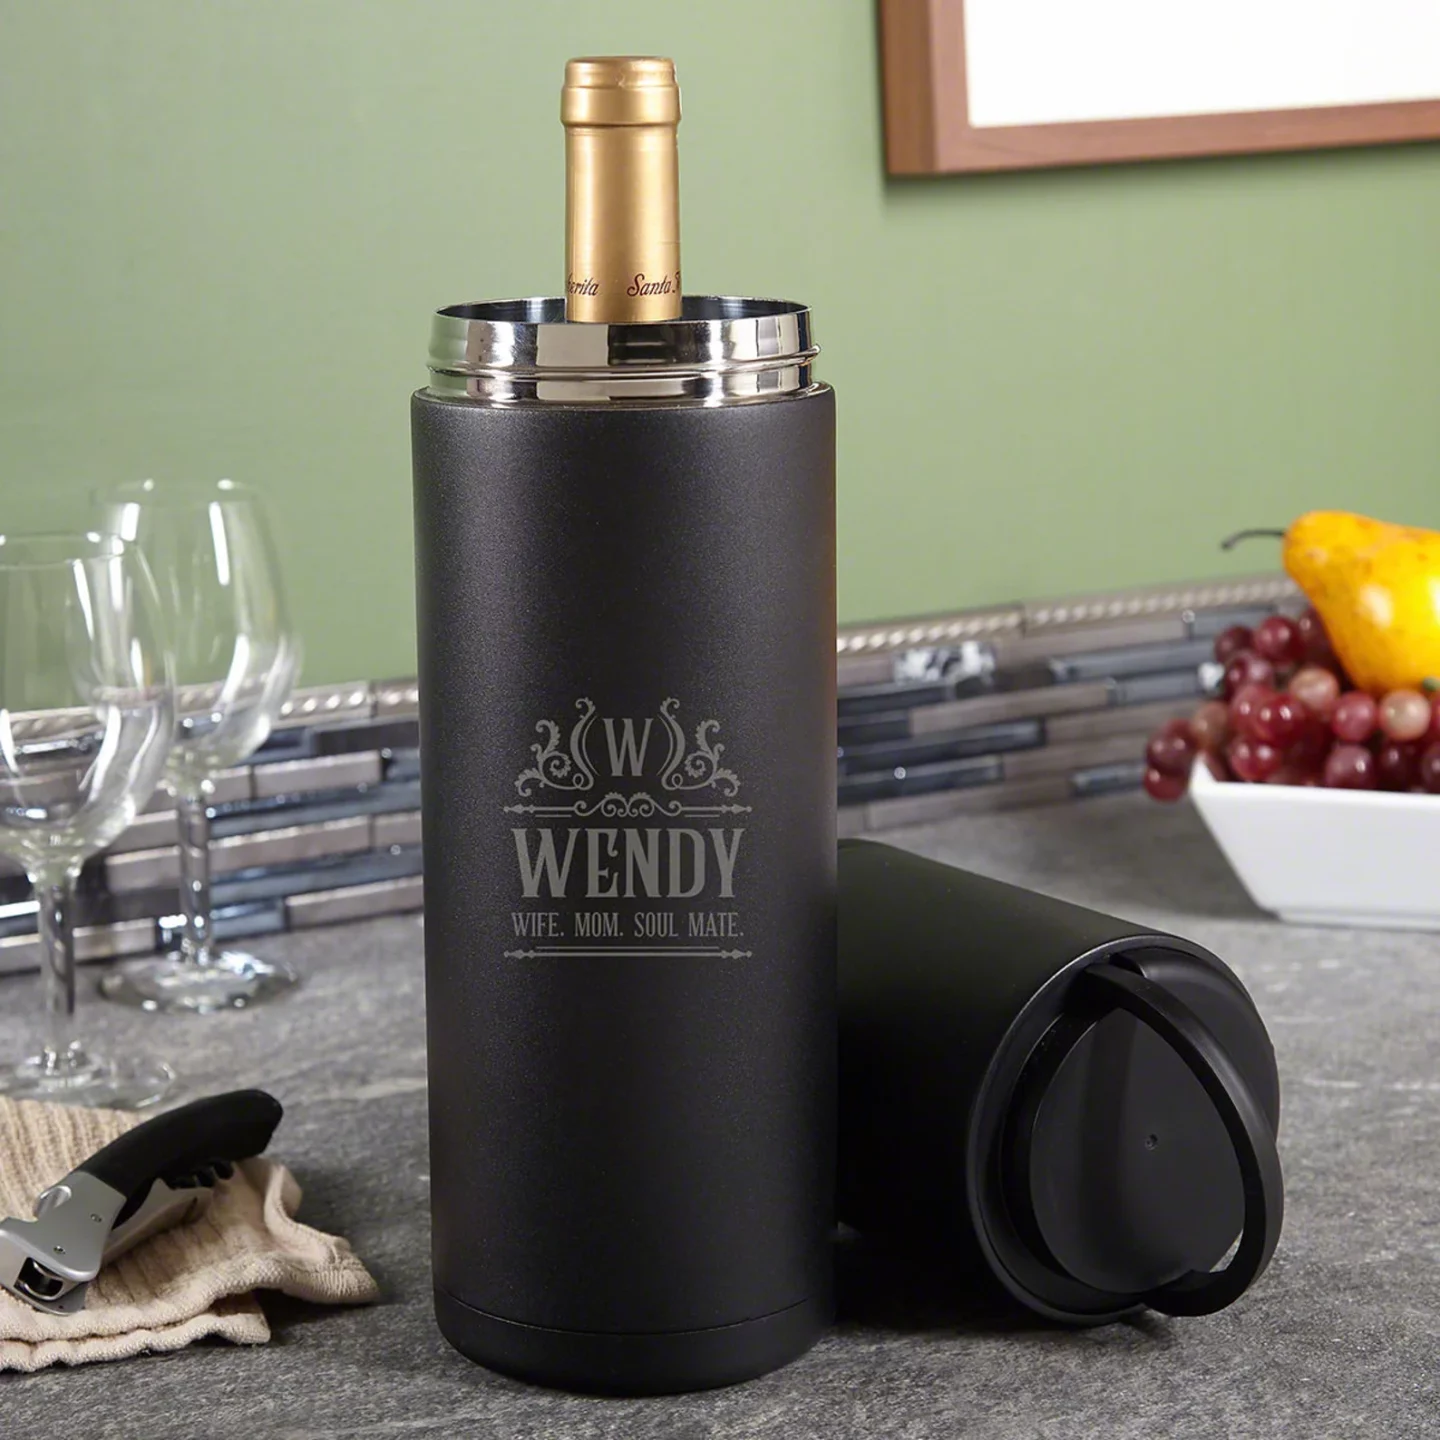 Black, engraved and portable wine chiller holding a bottle of wine